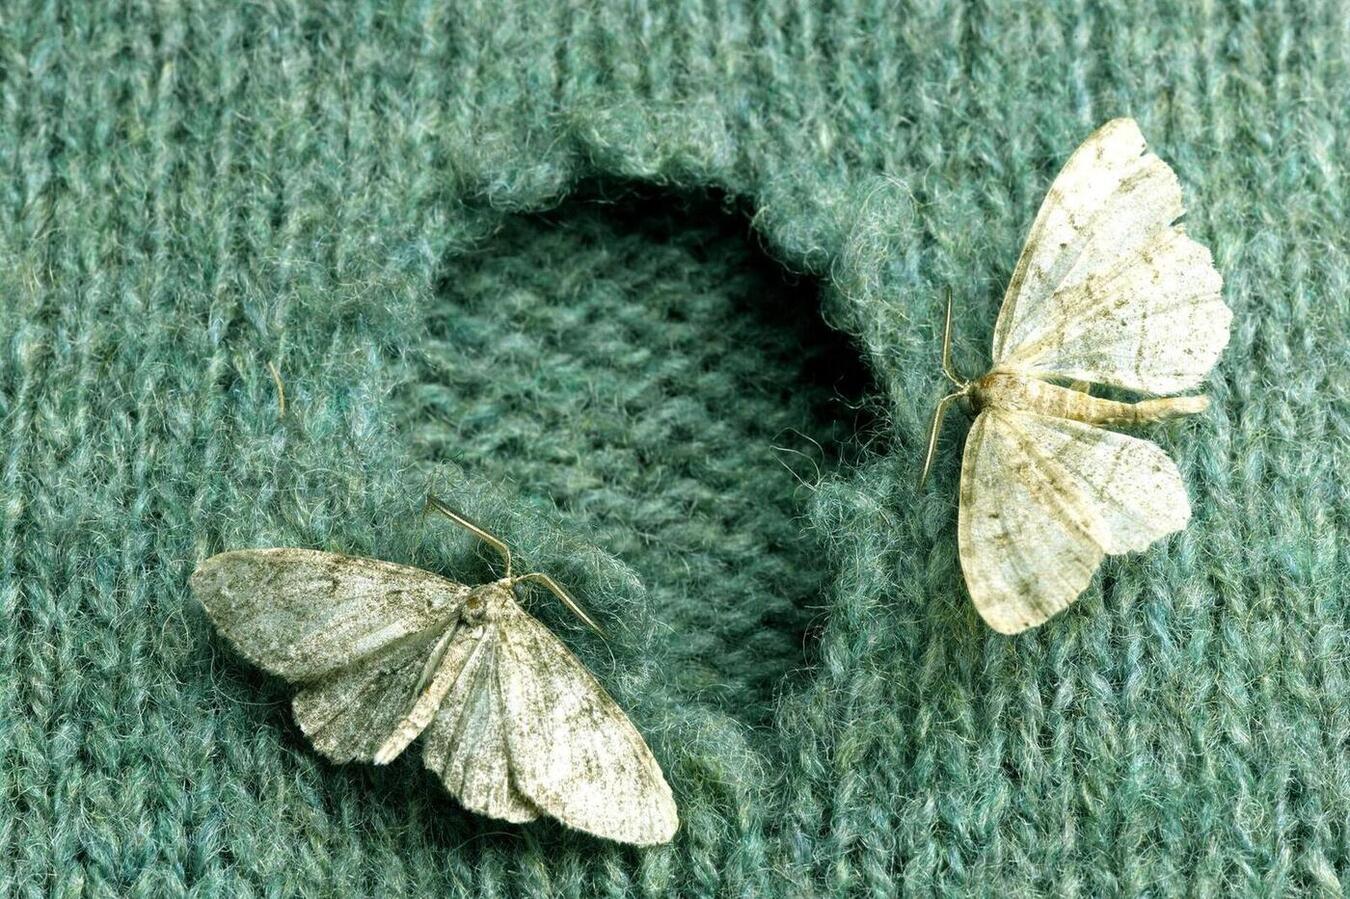 SAY GOODBYE TO CLOTHES MOTHS WITH THESE 4 NATURAL SOLUTIONS